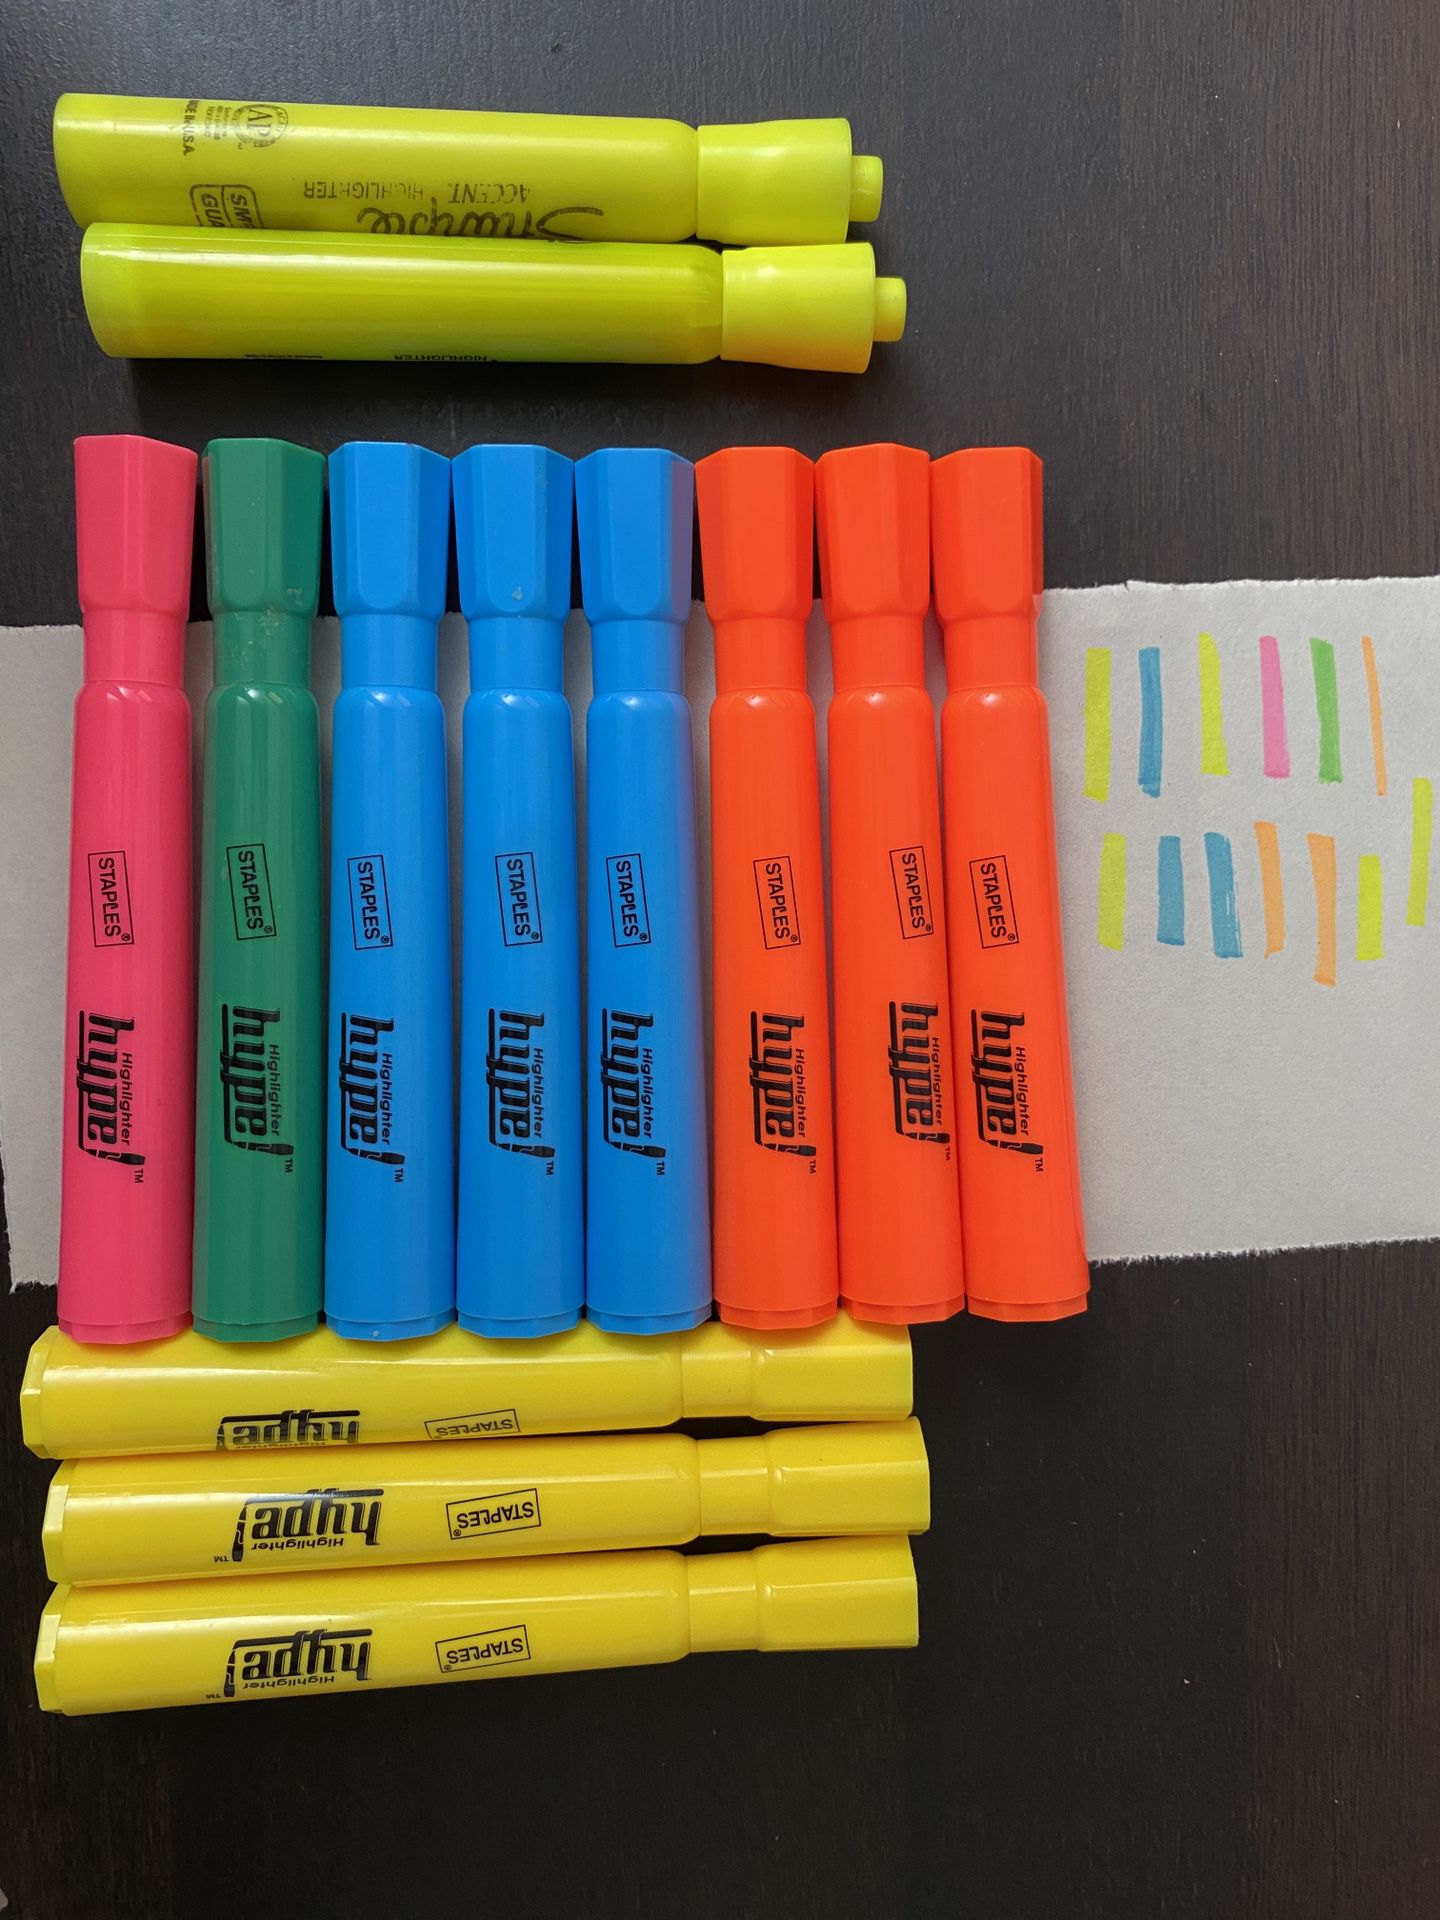 Highlighters Set of 13